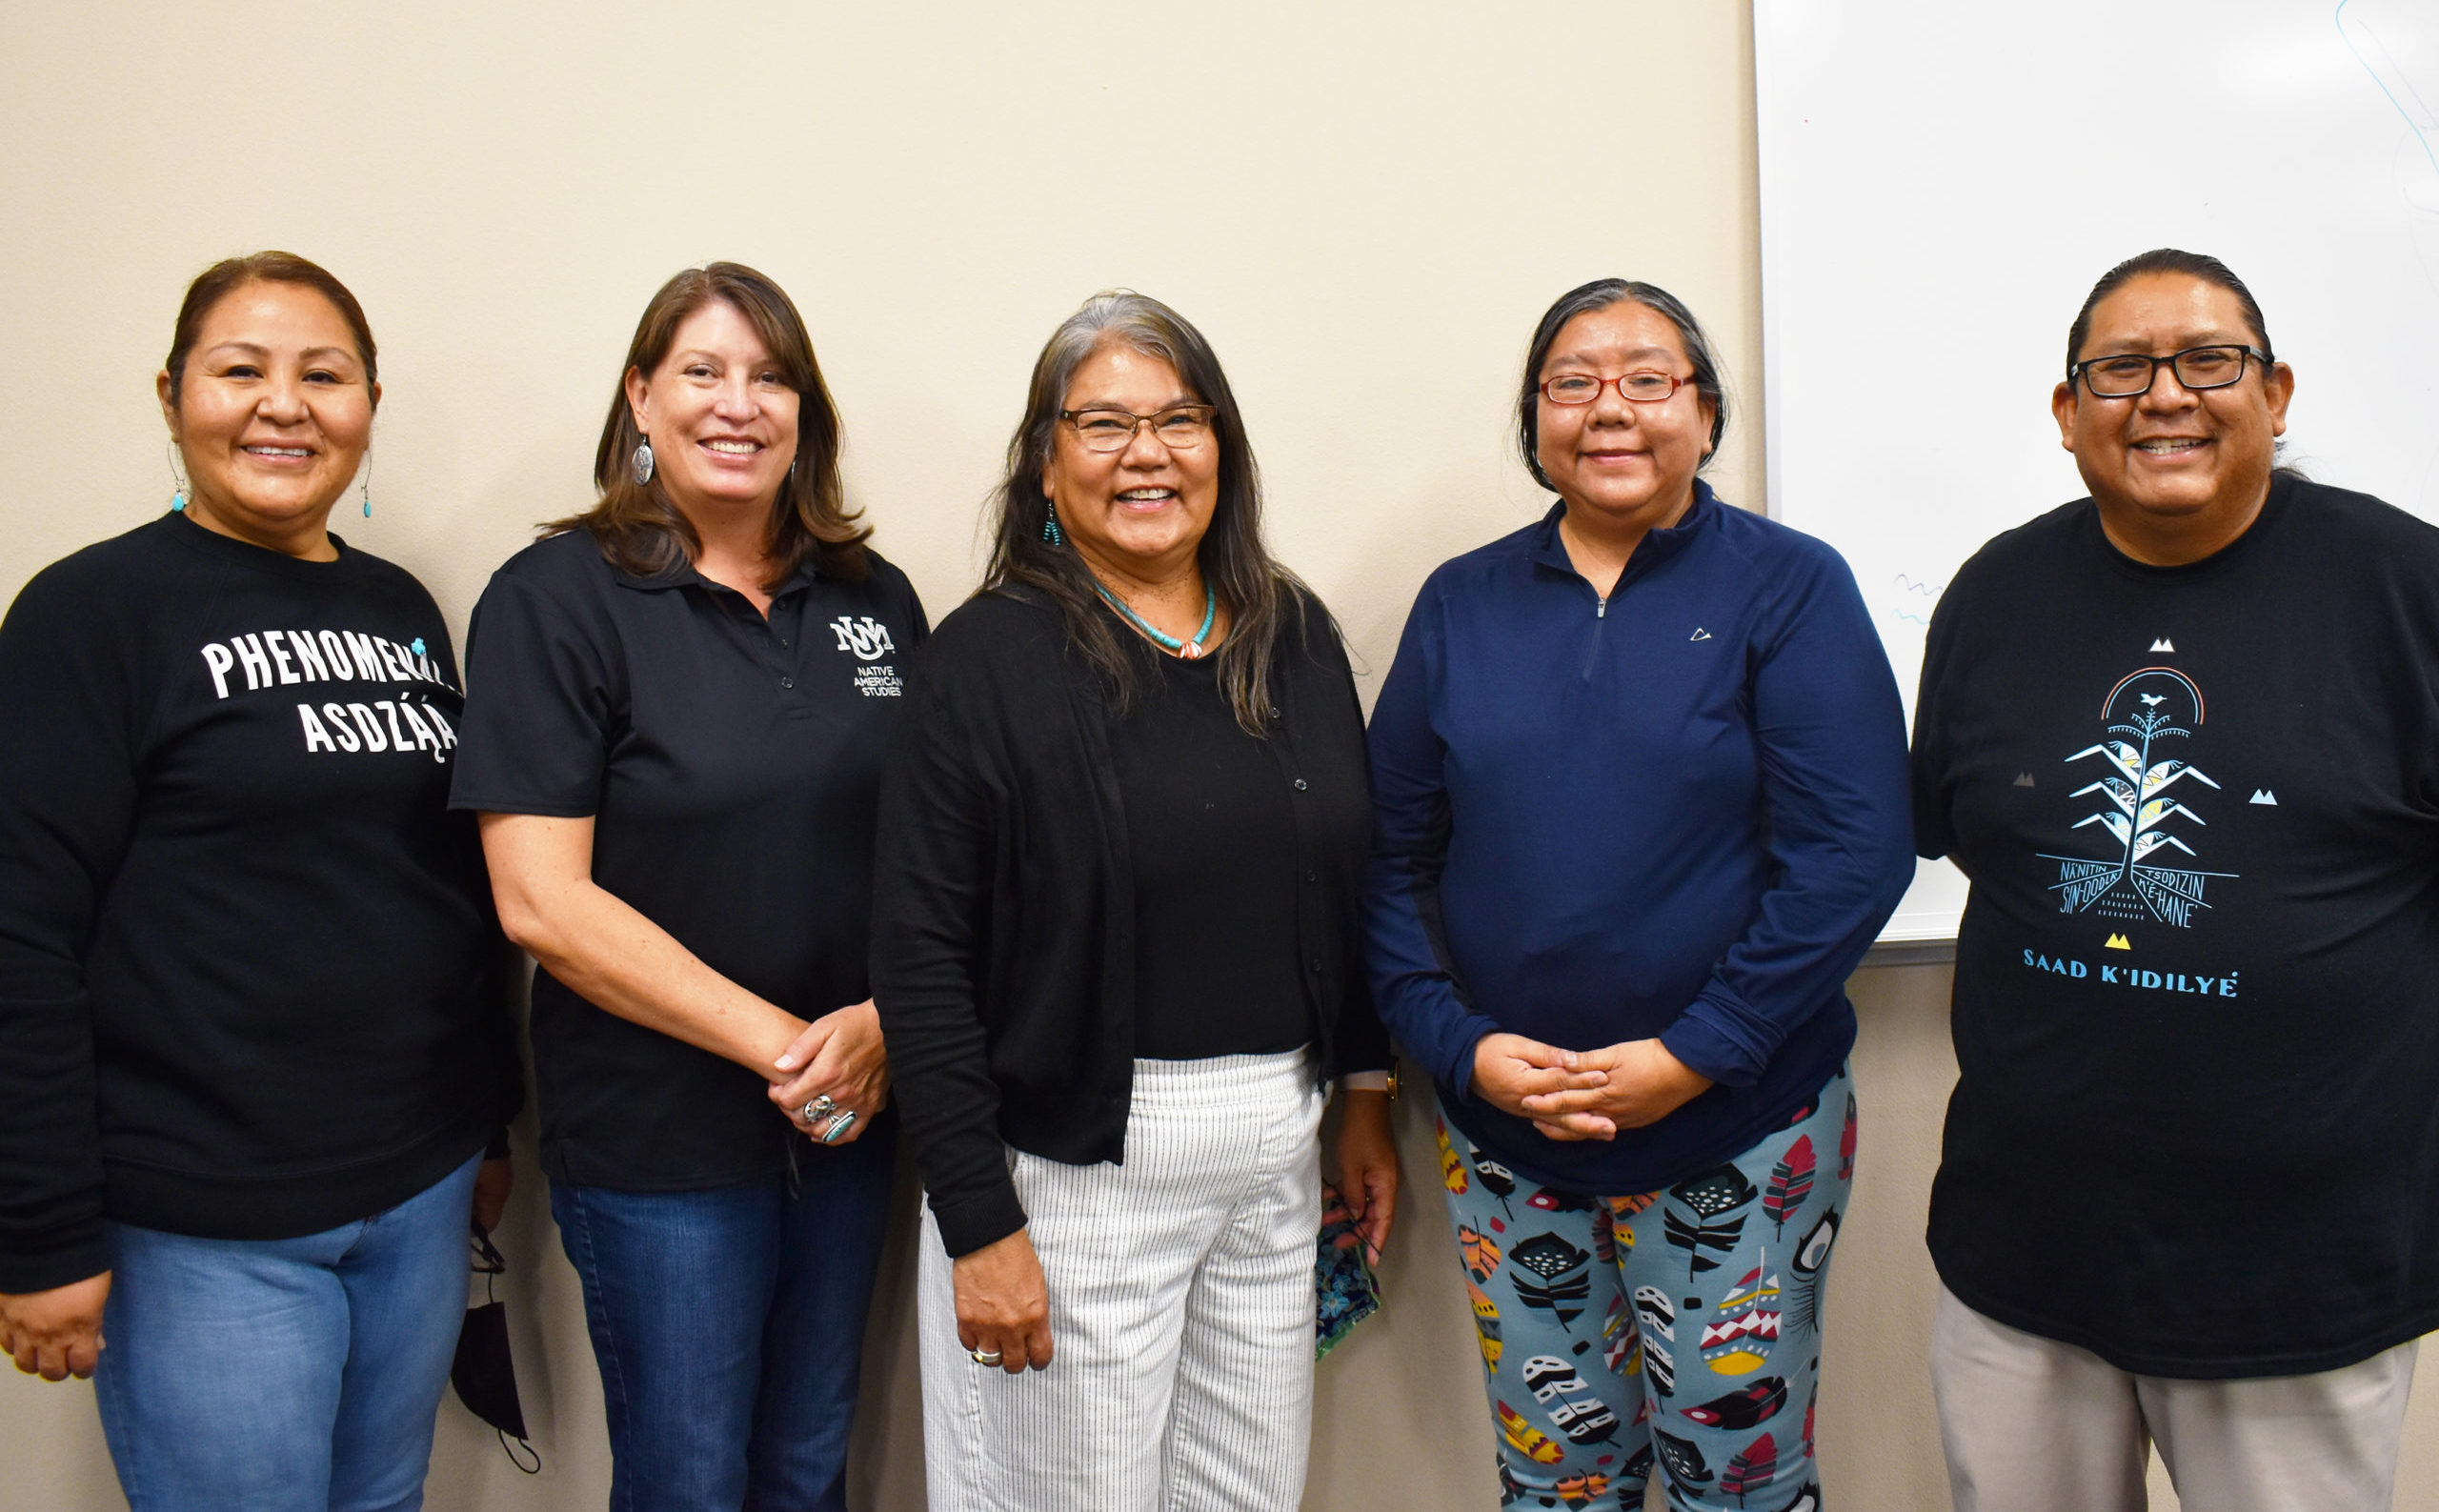 (From left to right) Cheryl Yazzie, Tiffany Lee, Mary Whitehair-Frazier, Melvatha Chee, Warlance Chee